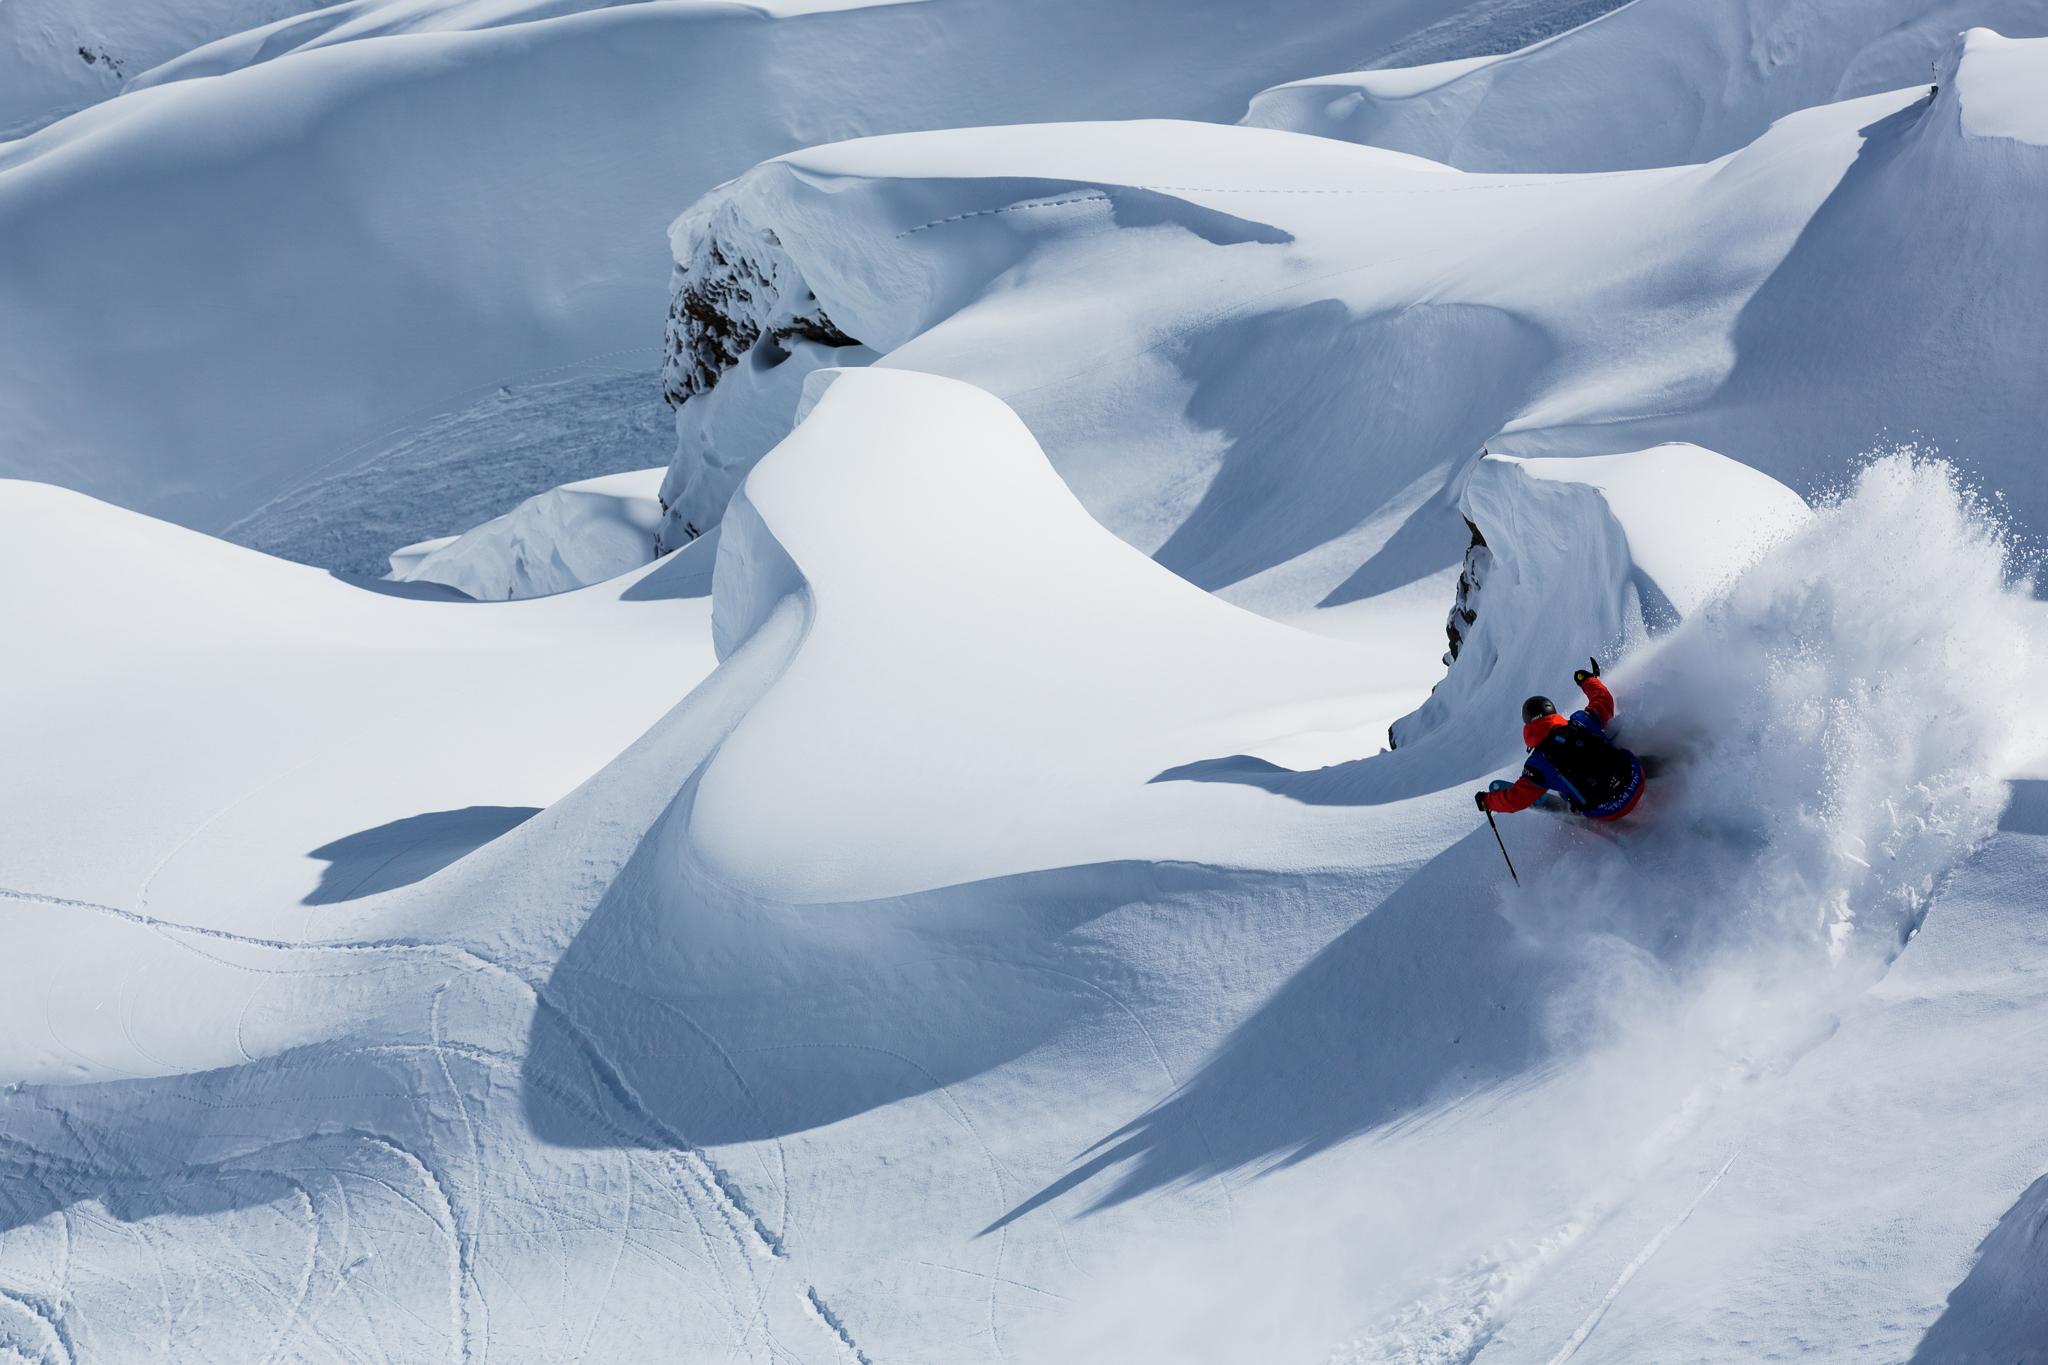 A heli-skiing trip gives thrill-seekers access to untouched powder